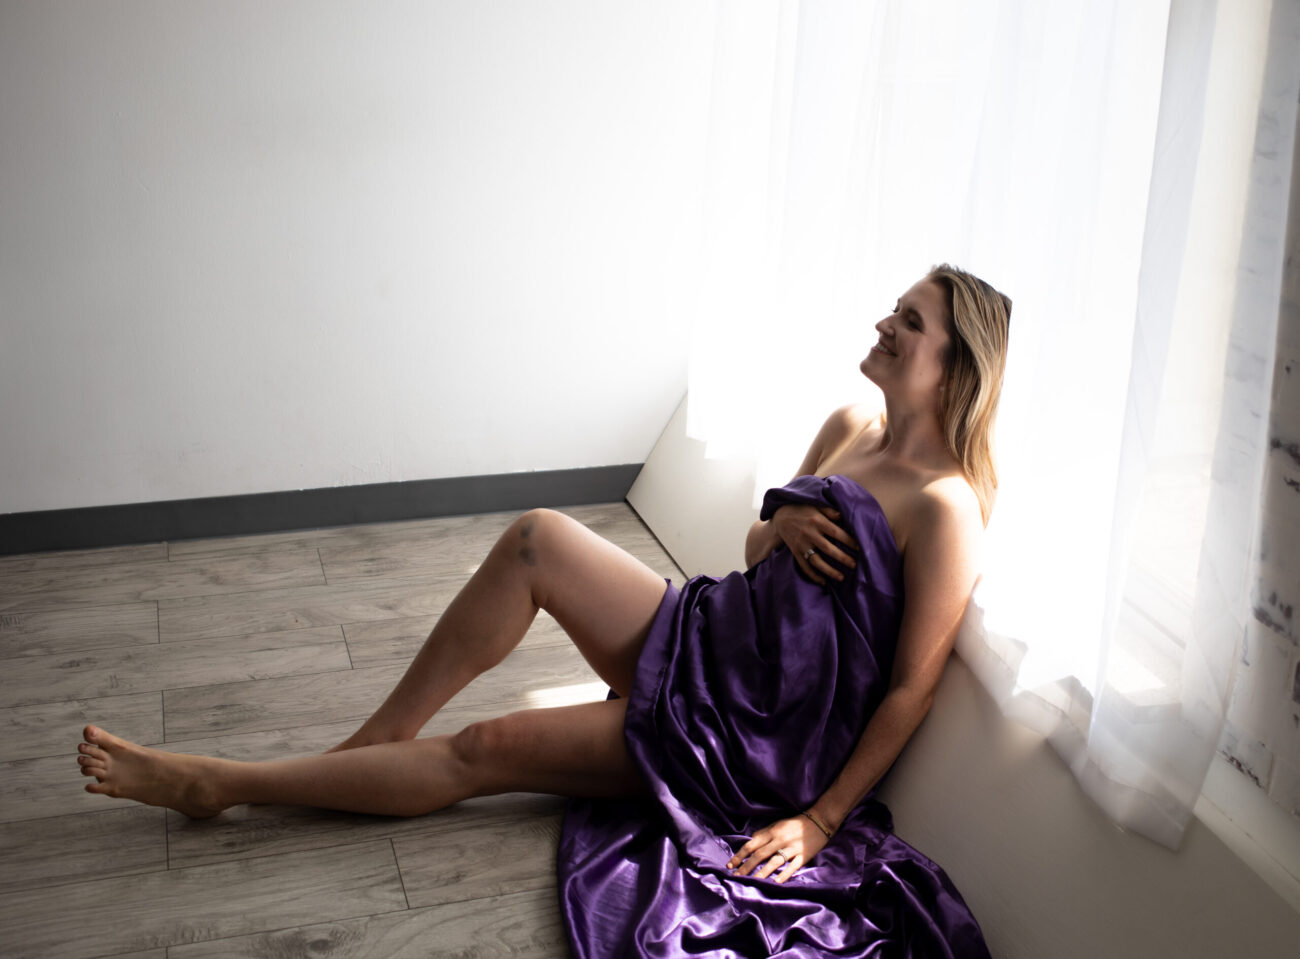 Brunette uses a purple sheet to cover while sitting and smiling against a window.